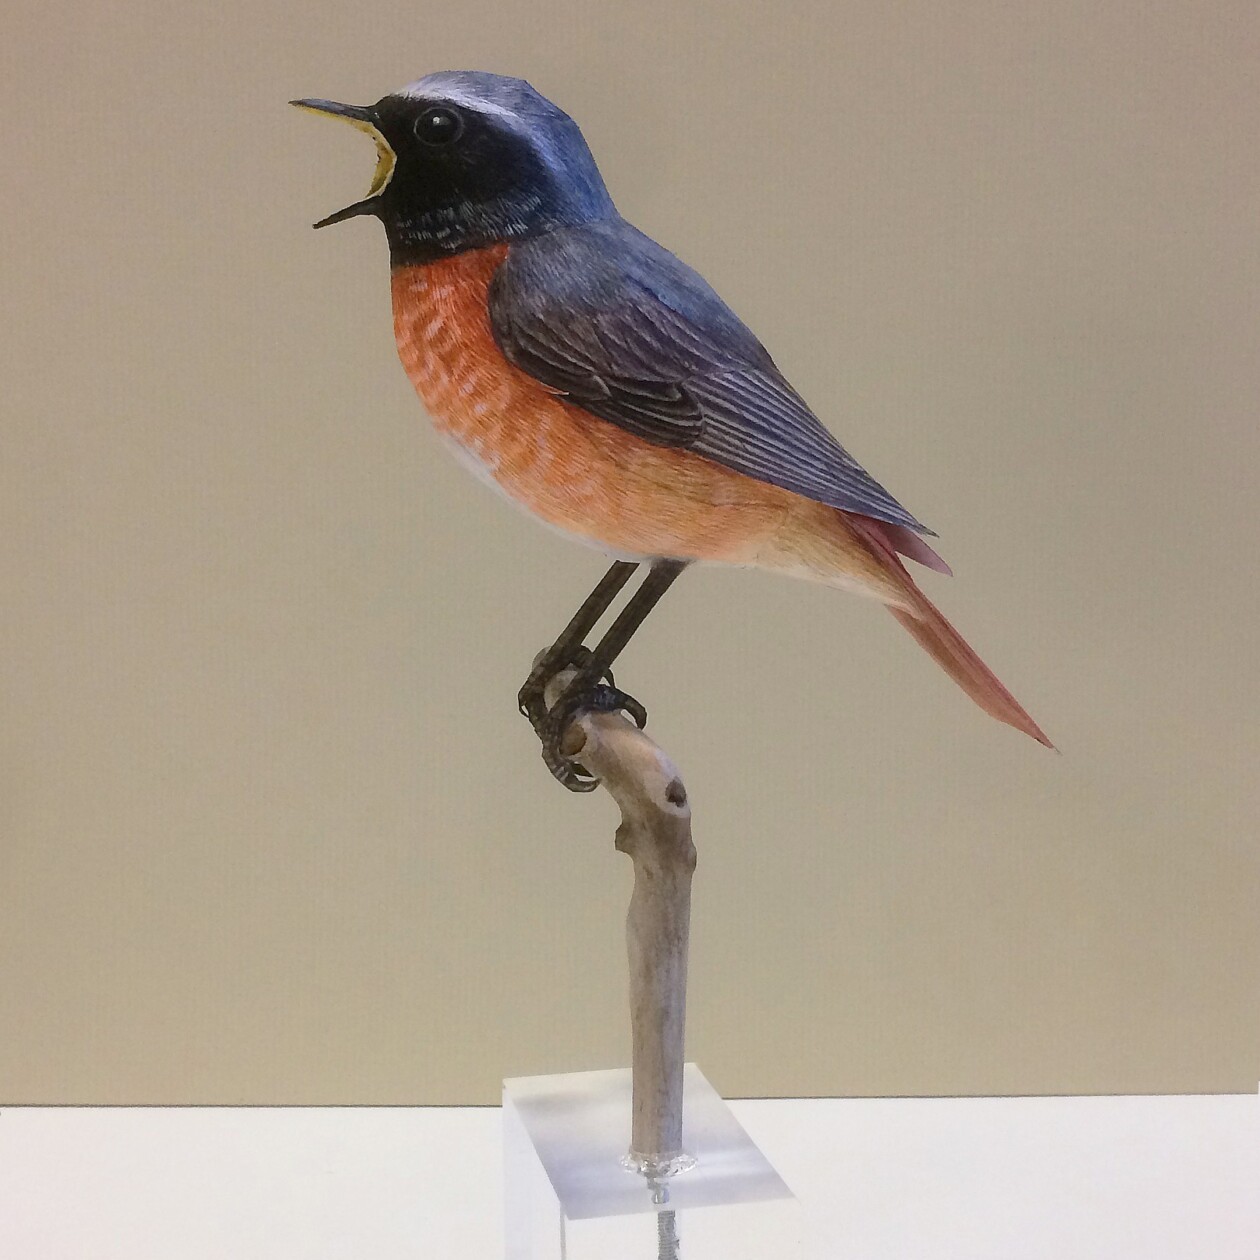 Hyper Realistic Bird Sculptures Made From Paper And Watercolor Paint By Johan Scherft (9)